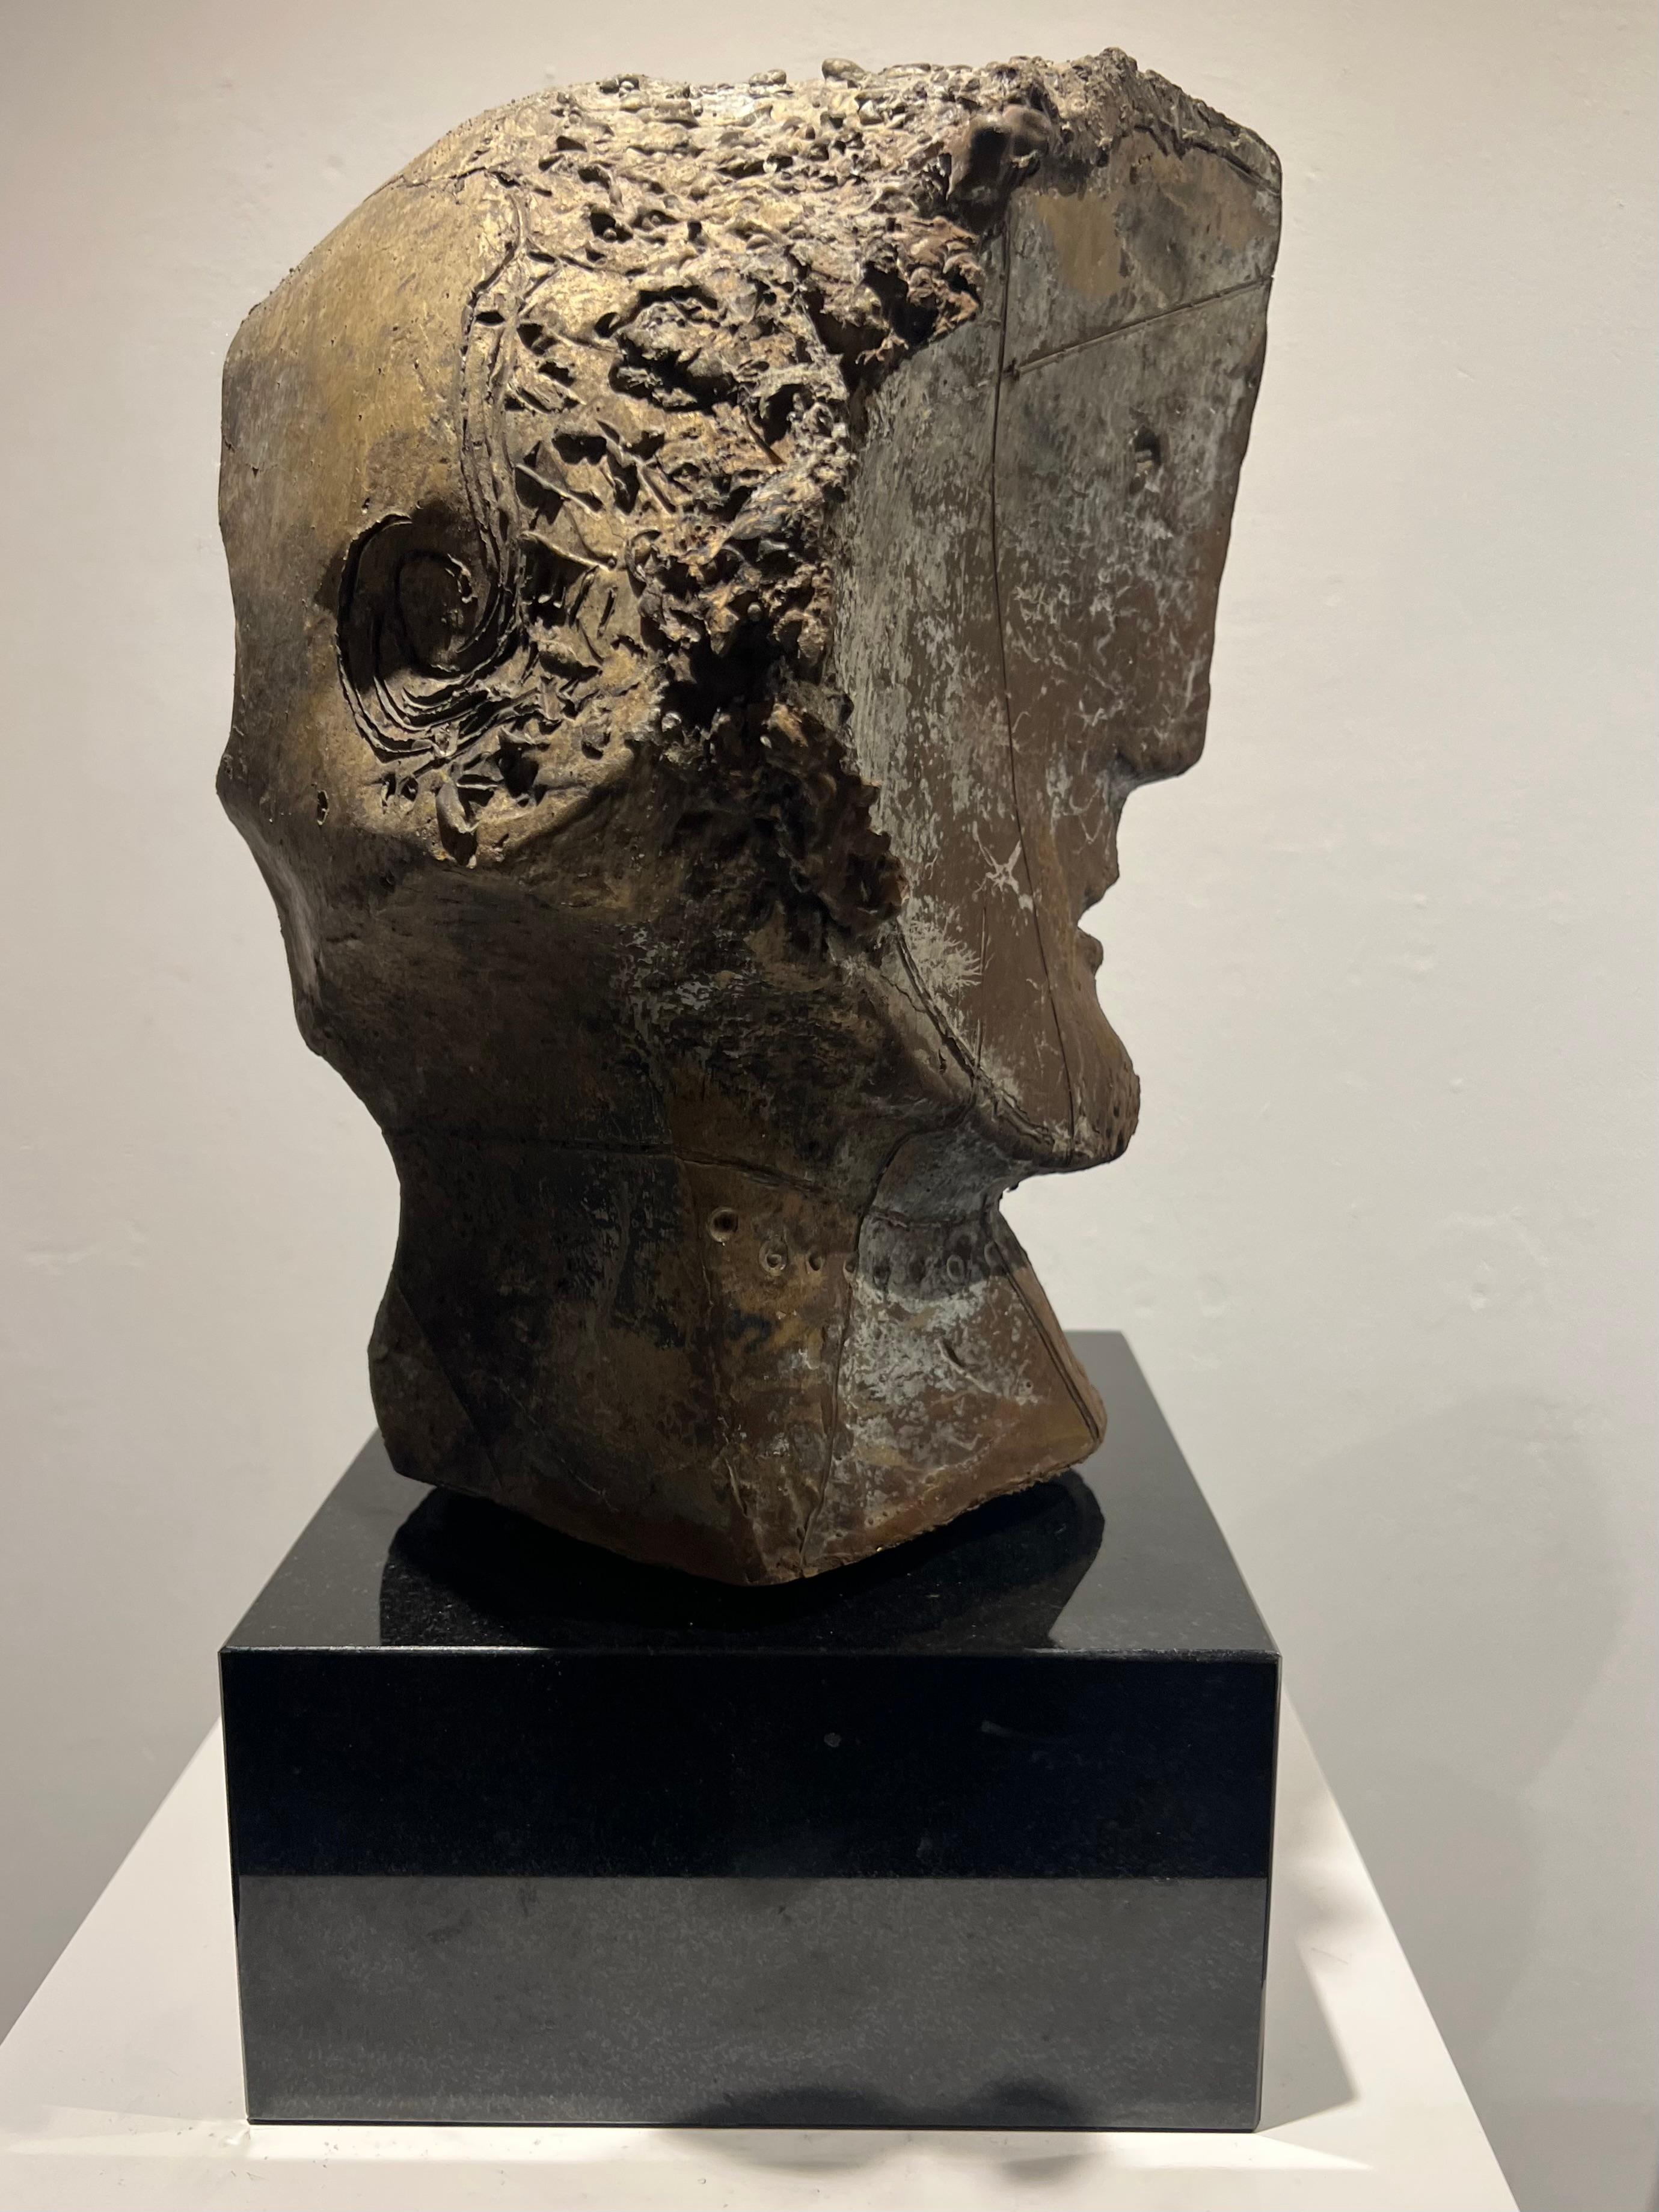 Inner Circle Casting Scale Bronze Sculpture Figurative Abstract Head In Stock - Gold Figurative Sculpture by Thomas Junghans